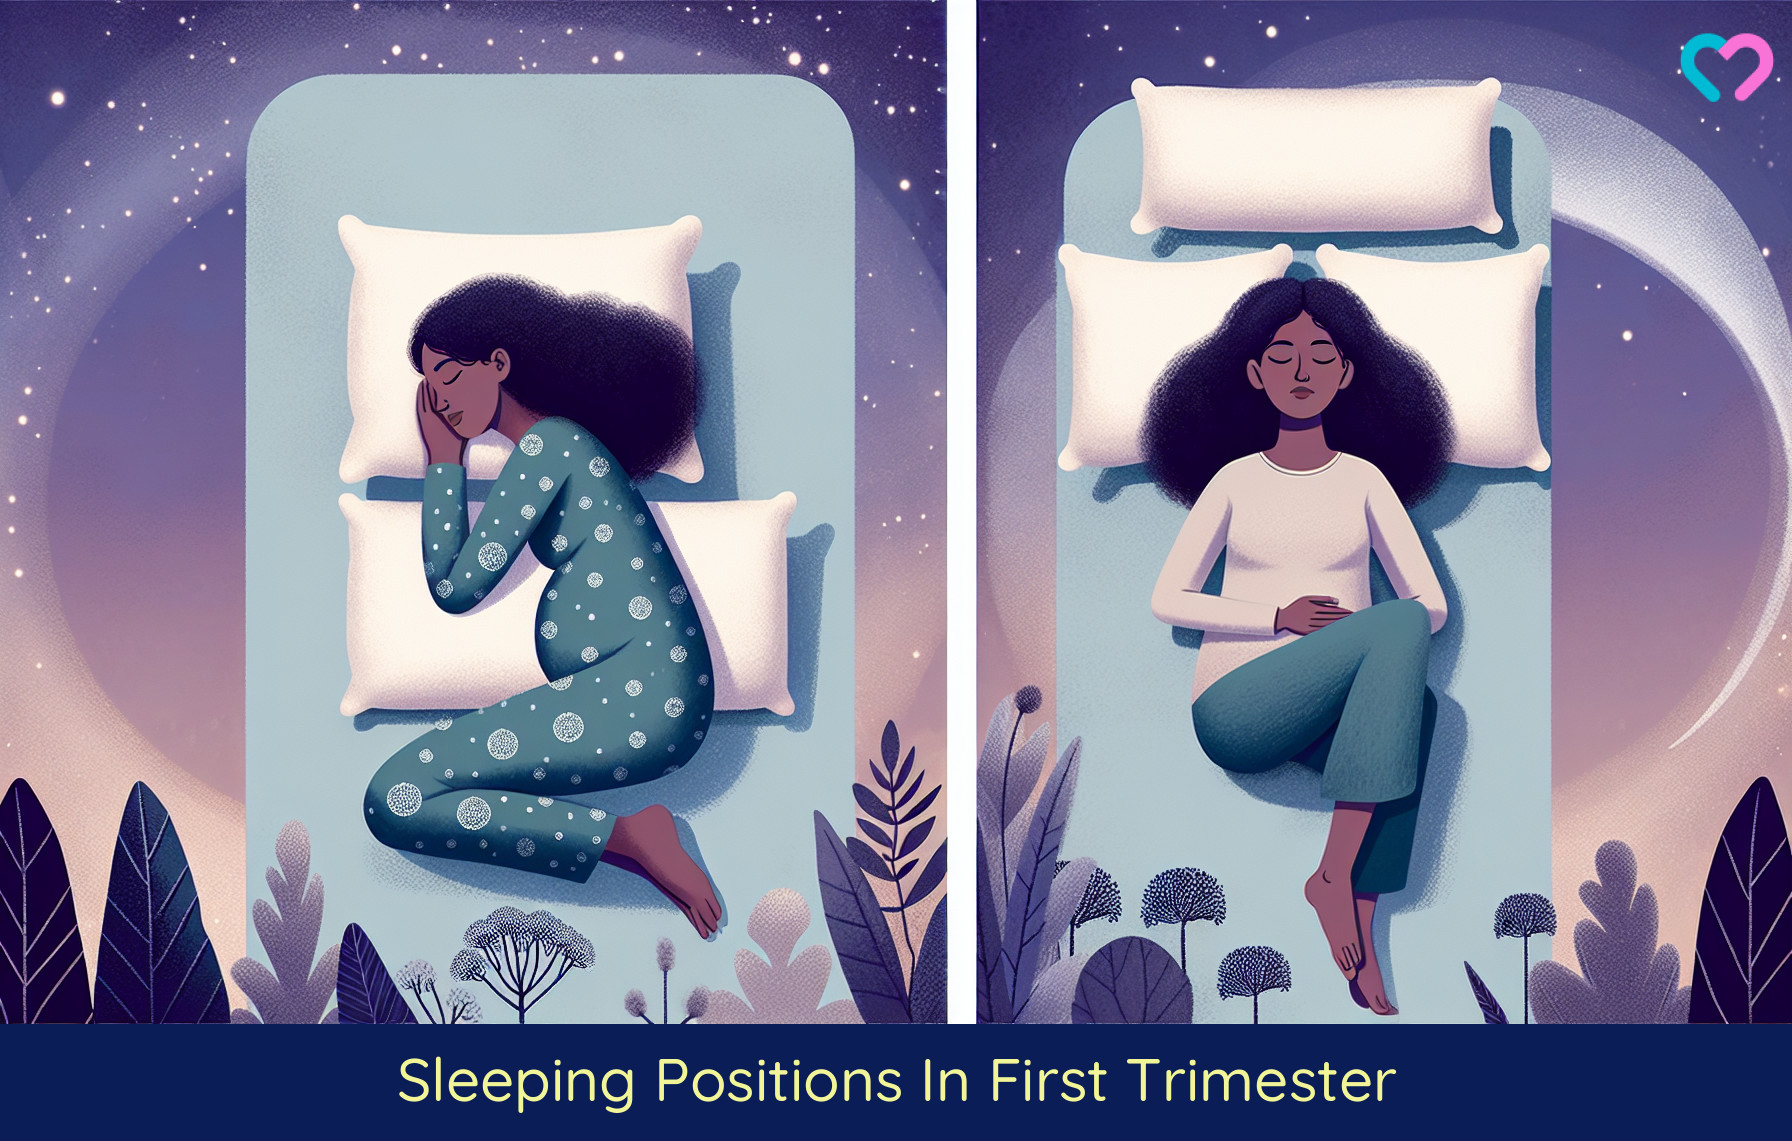 Sleeping Positions In First Trimester_illustration